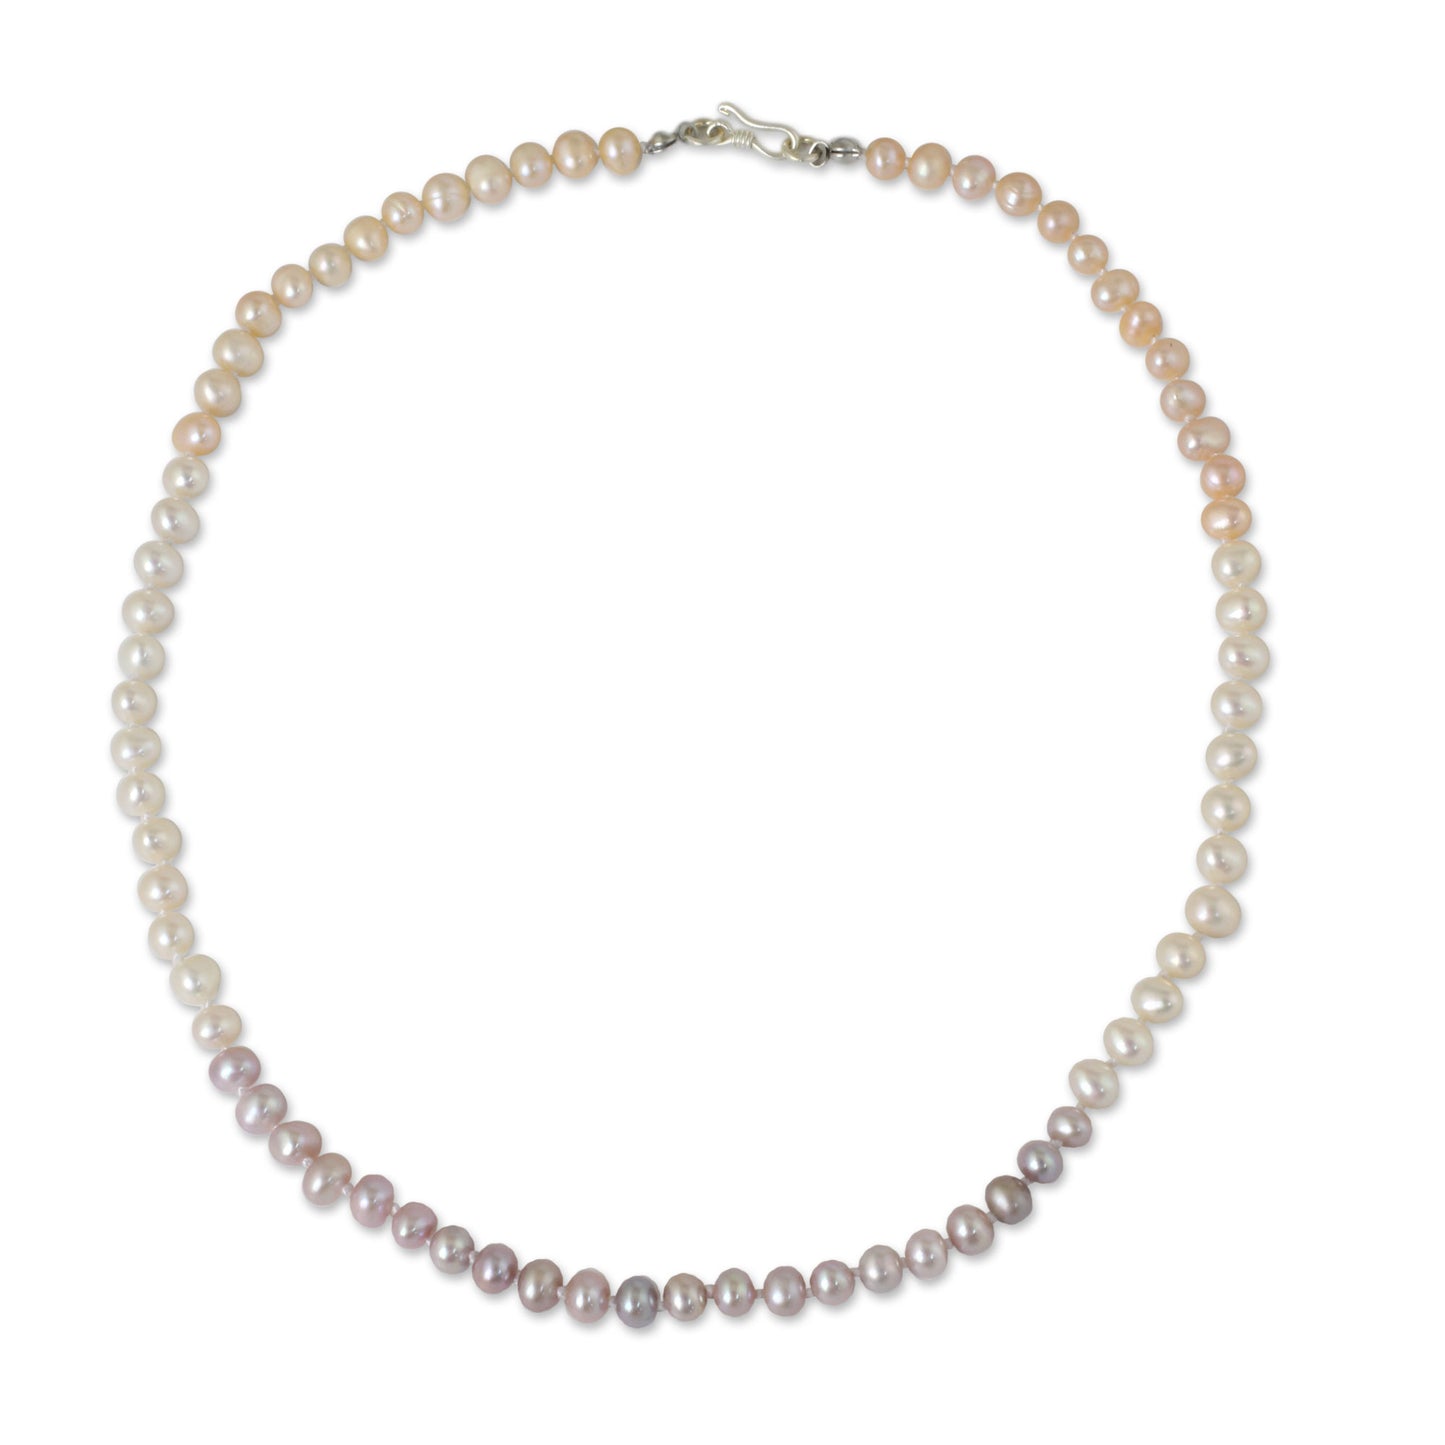 Natural Sweetness Pink White Grey Pearls Necklace in Hand-knotted Strand